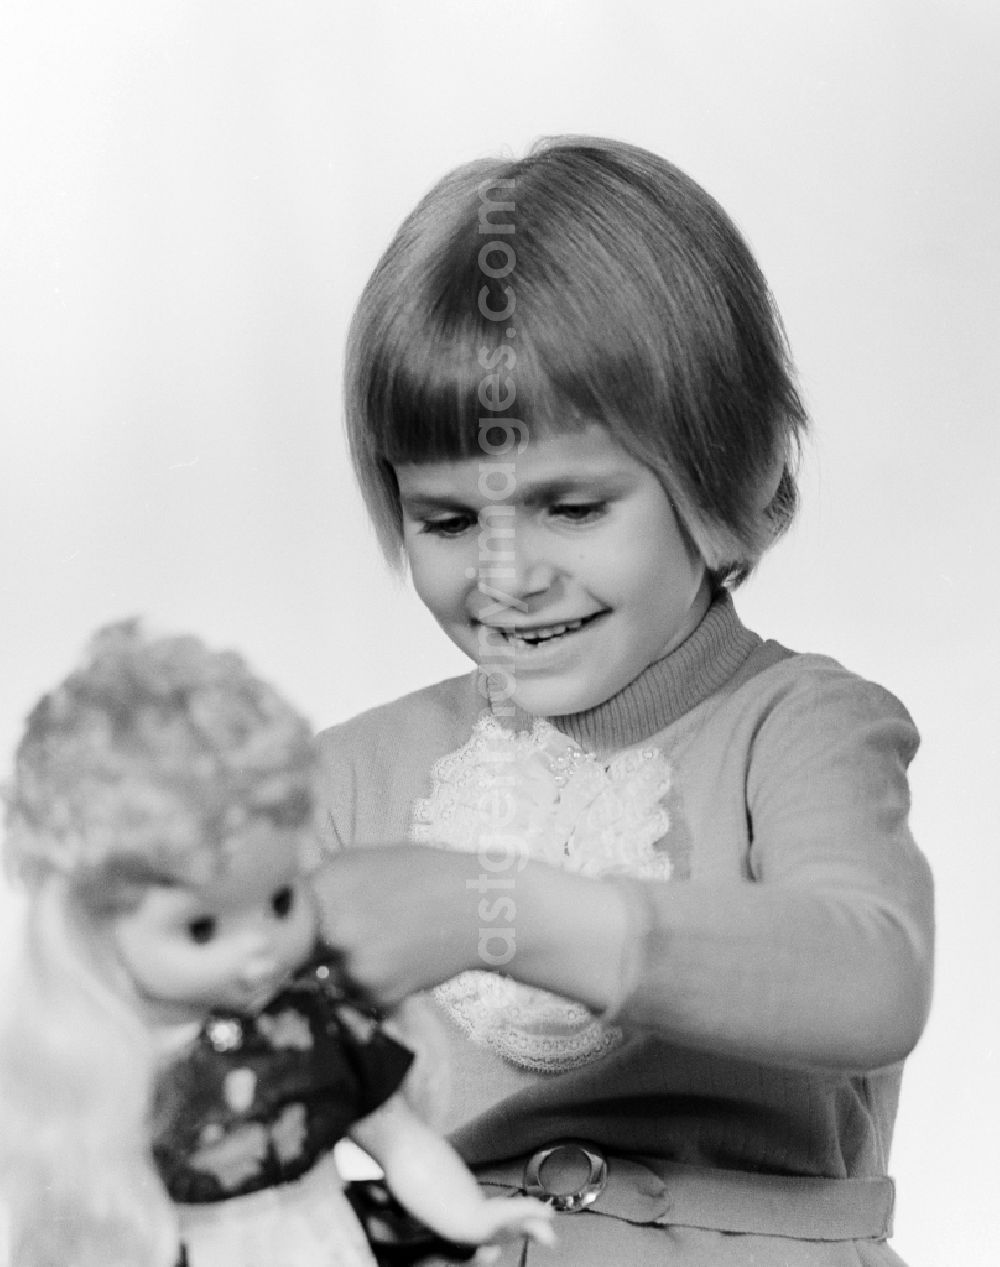 GDR image archive: Berlin - A small child playing with a doll in Berlin, the former capital of the GDR, German Democratic Republic